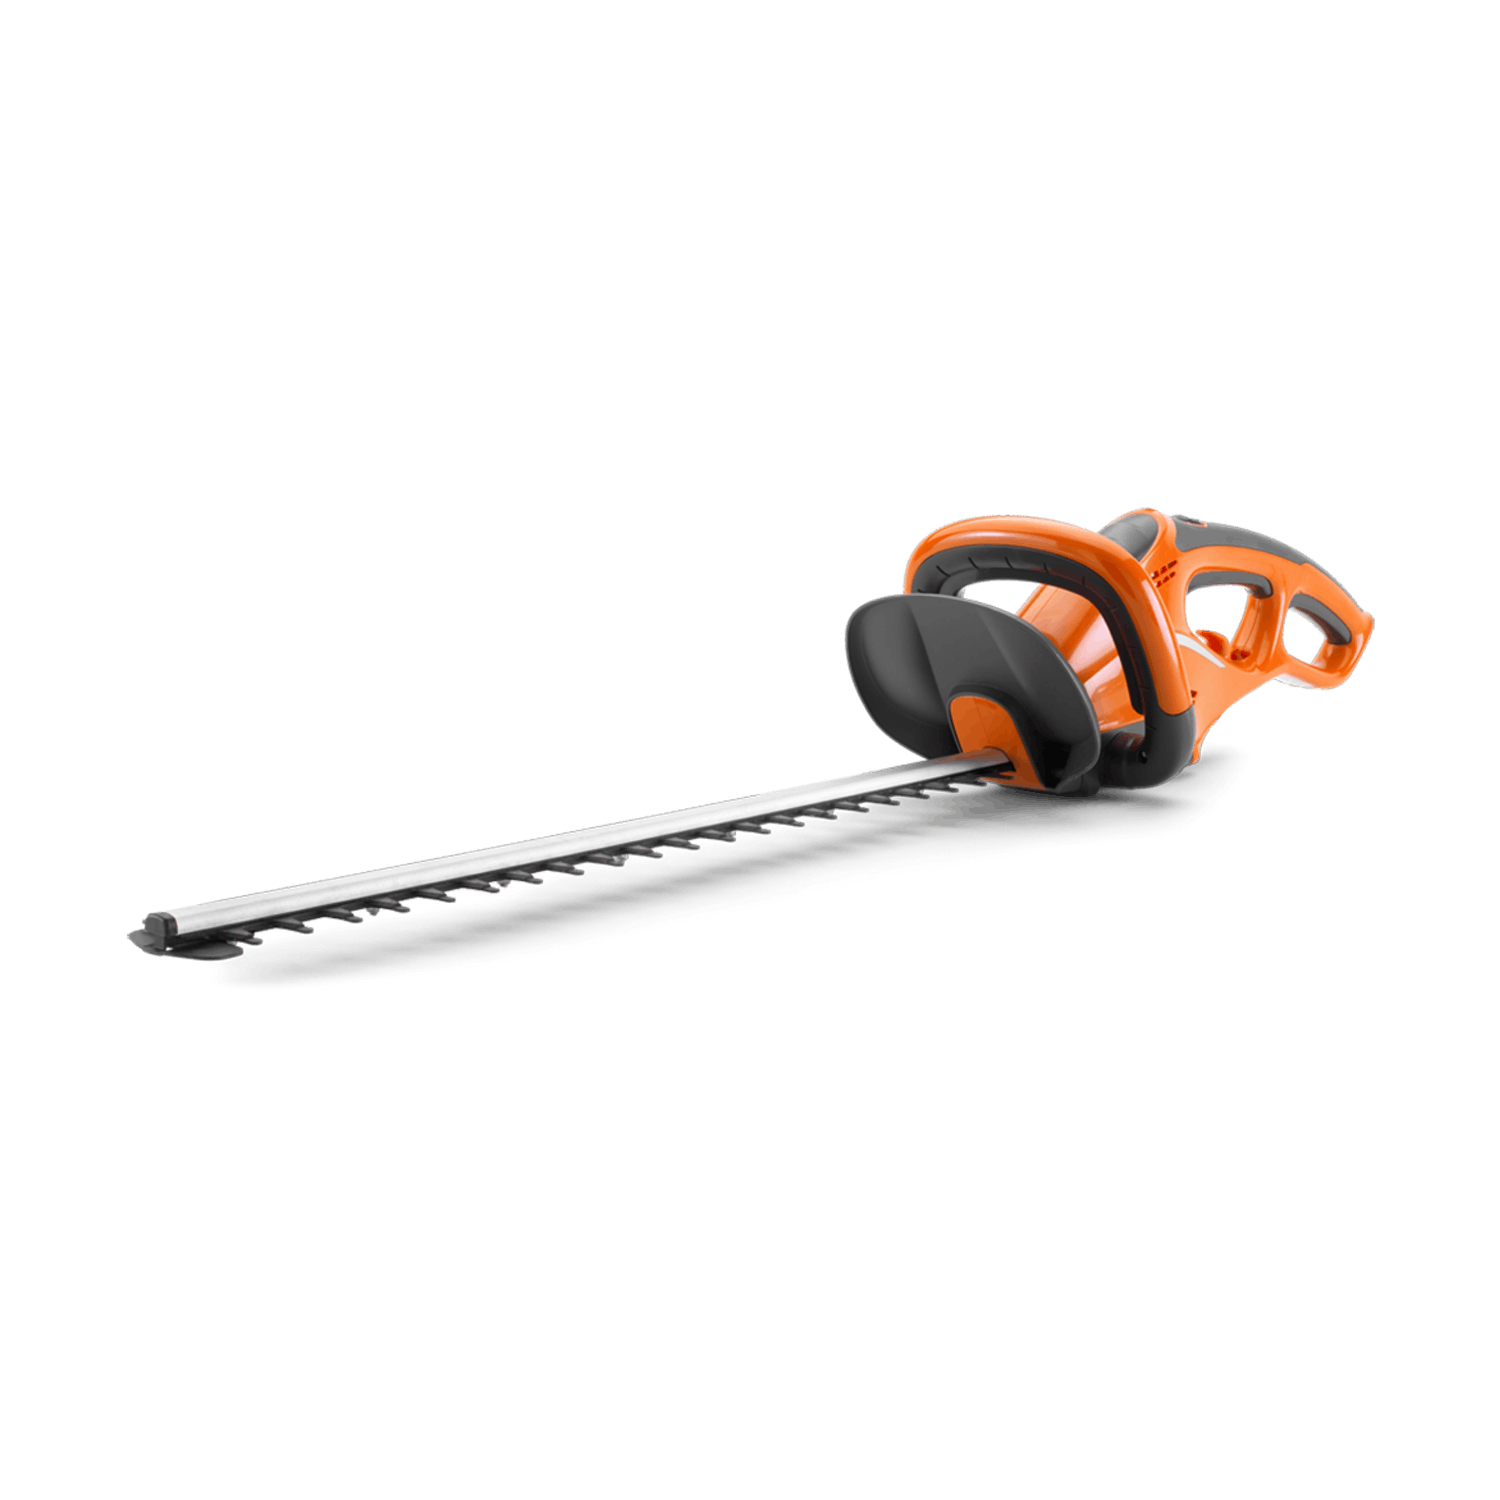 You save &pound10.02: Flymo Easi Cut 610XT Corded Hedge Trimmer
